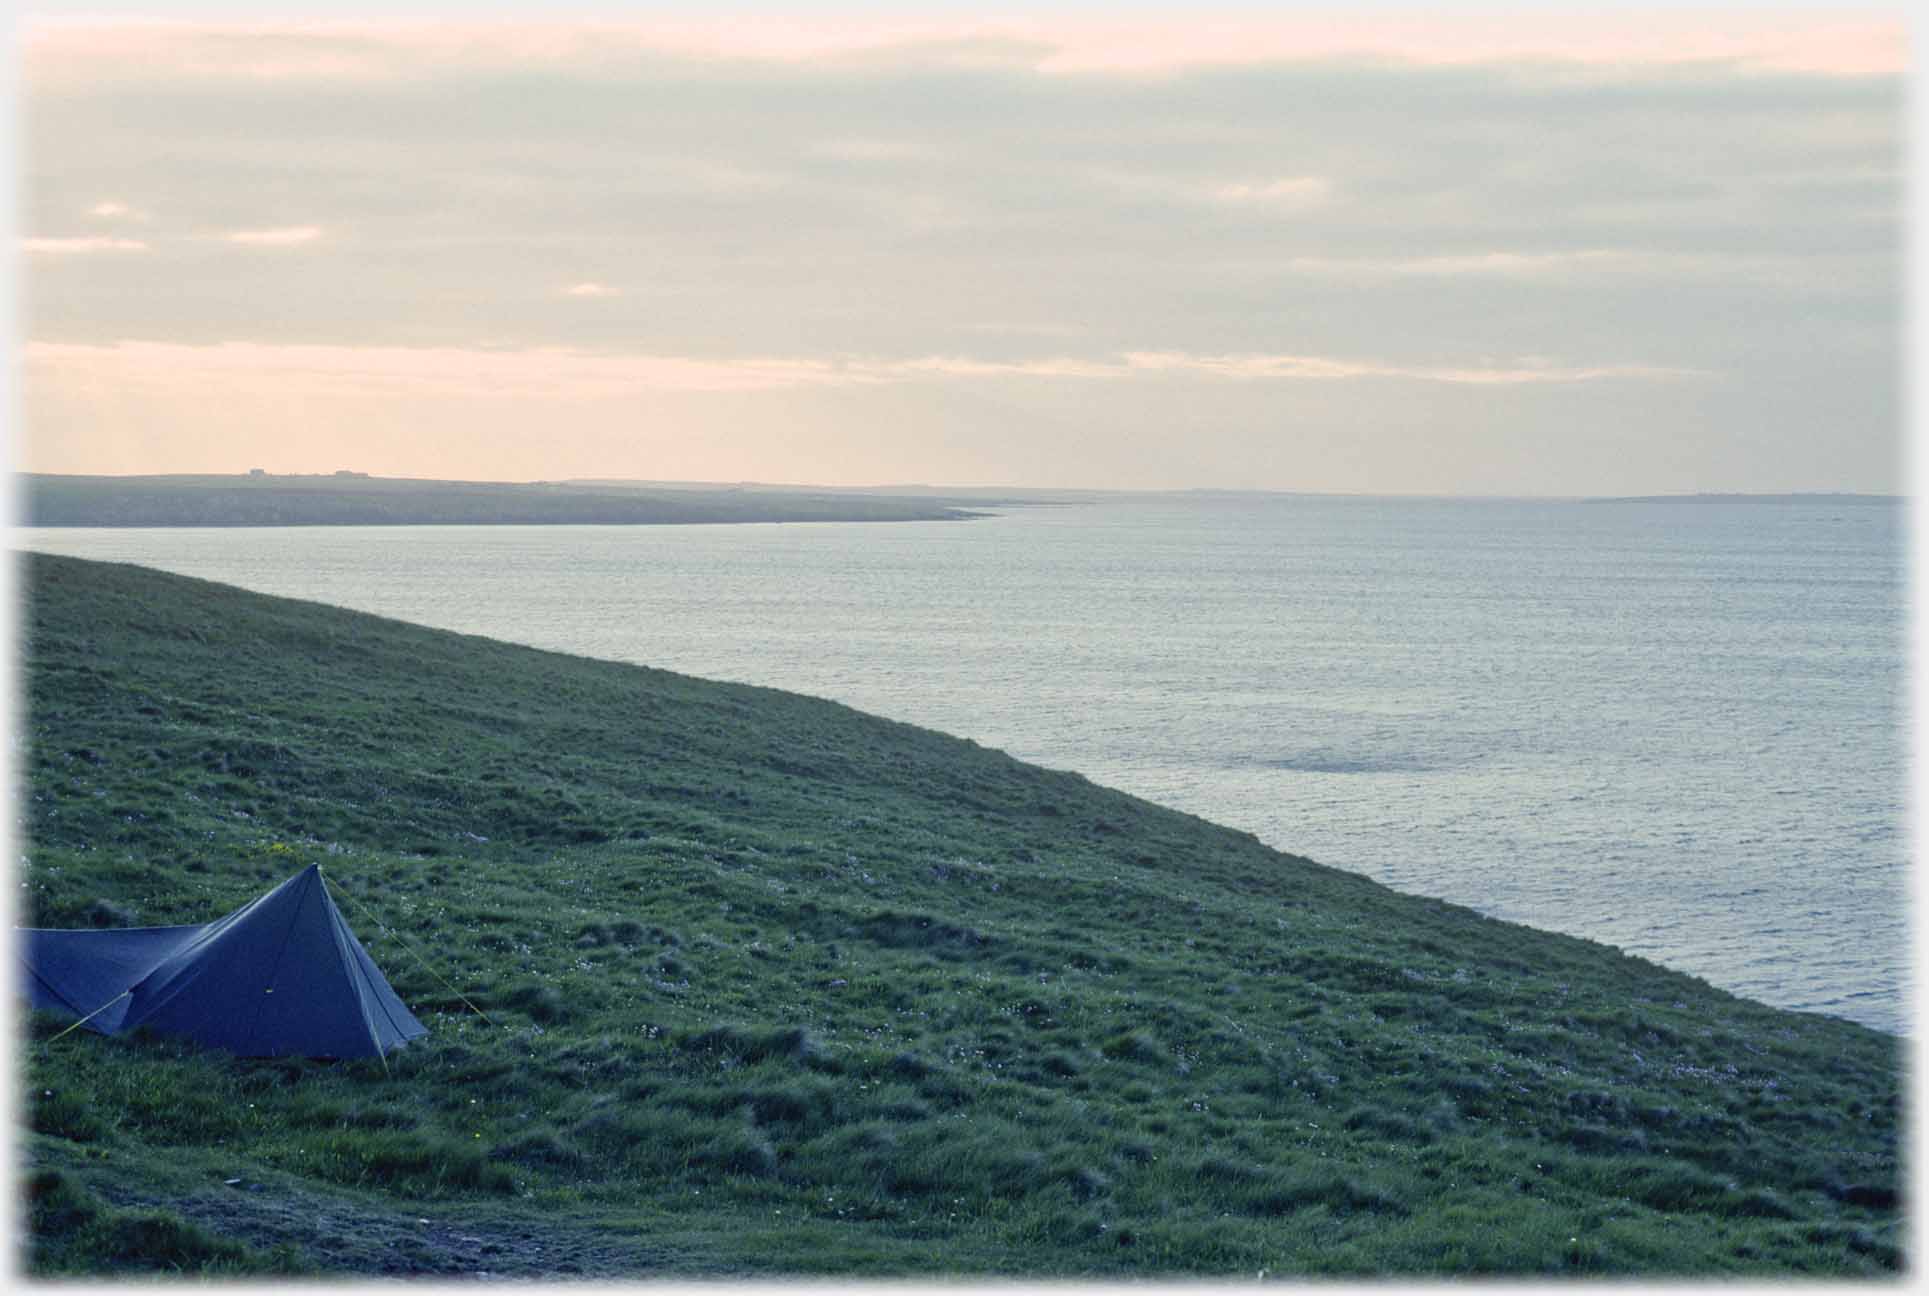 Tent pitched on grassy hillsde overlooking sea.